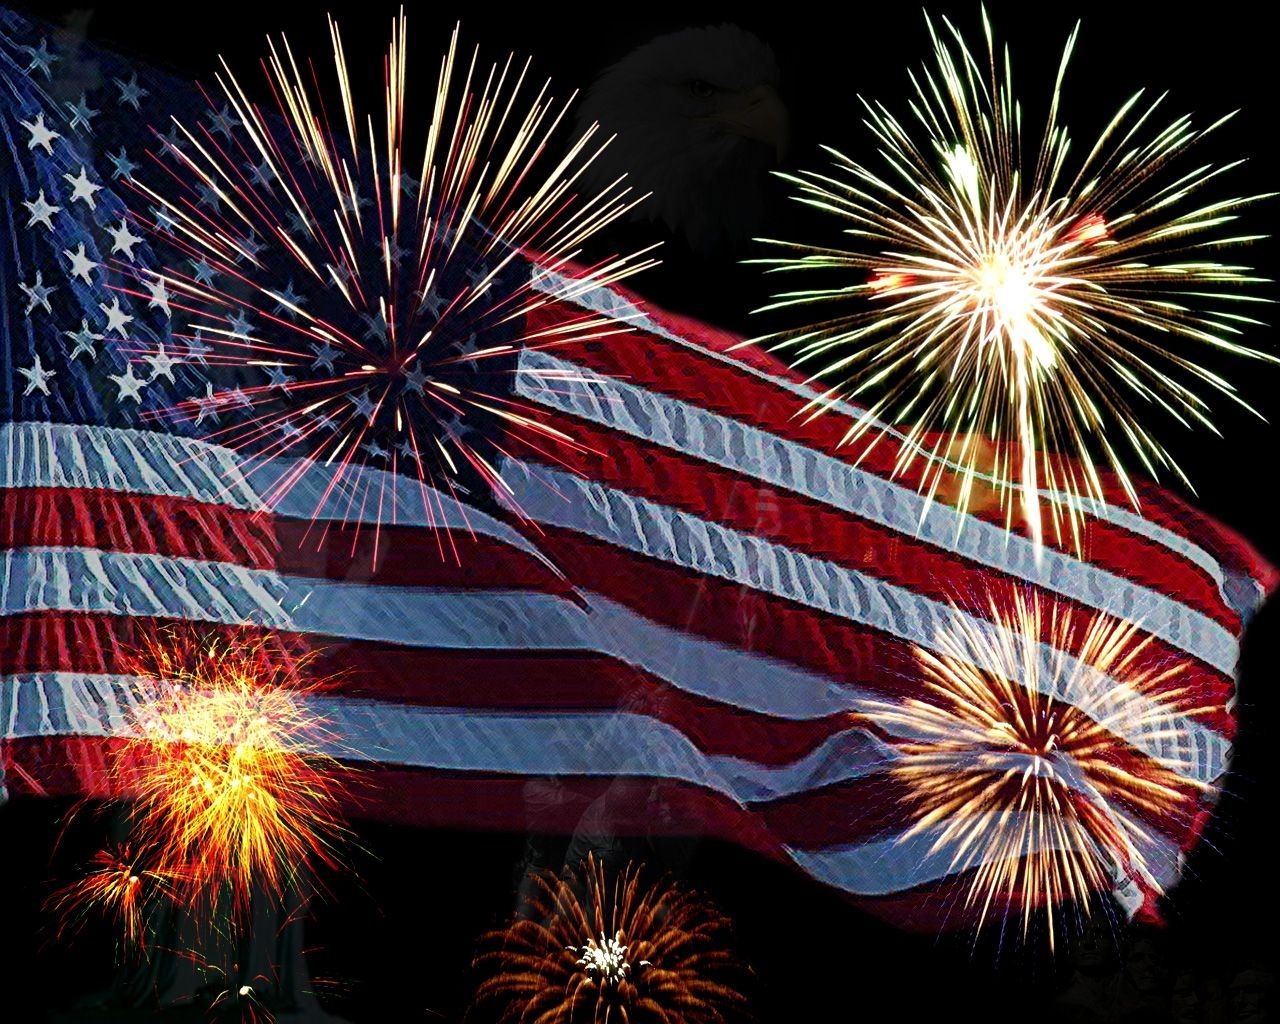 10 New Fourth Of July Wallpaper Screensavers FULL HD 1080p For PC Background